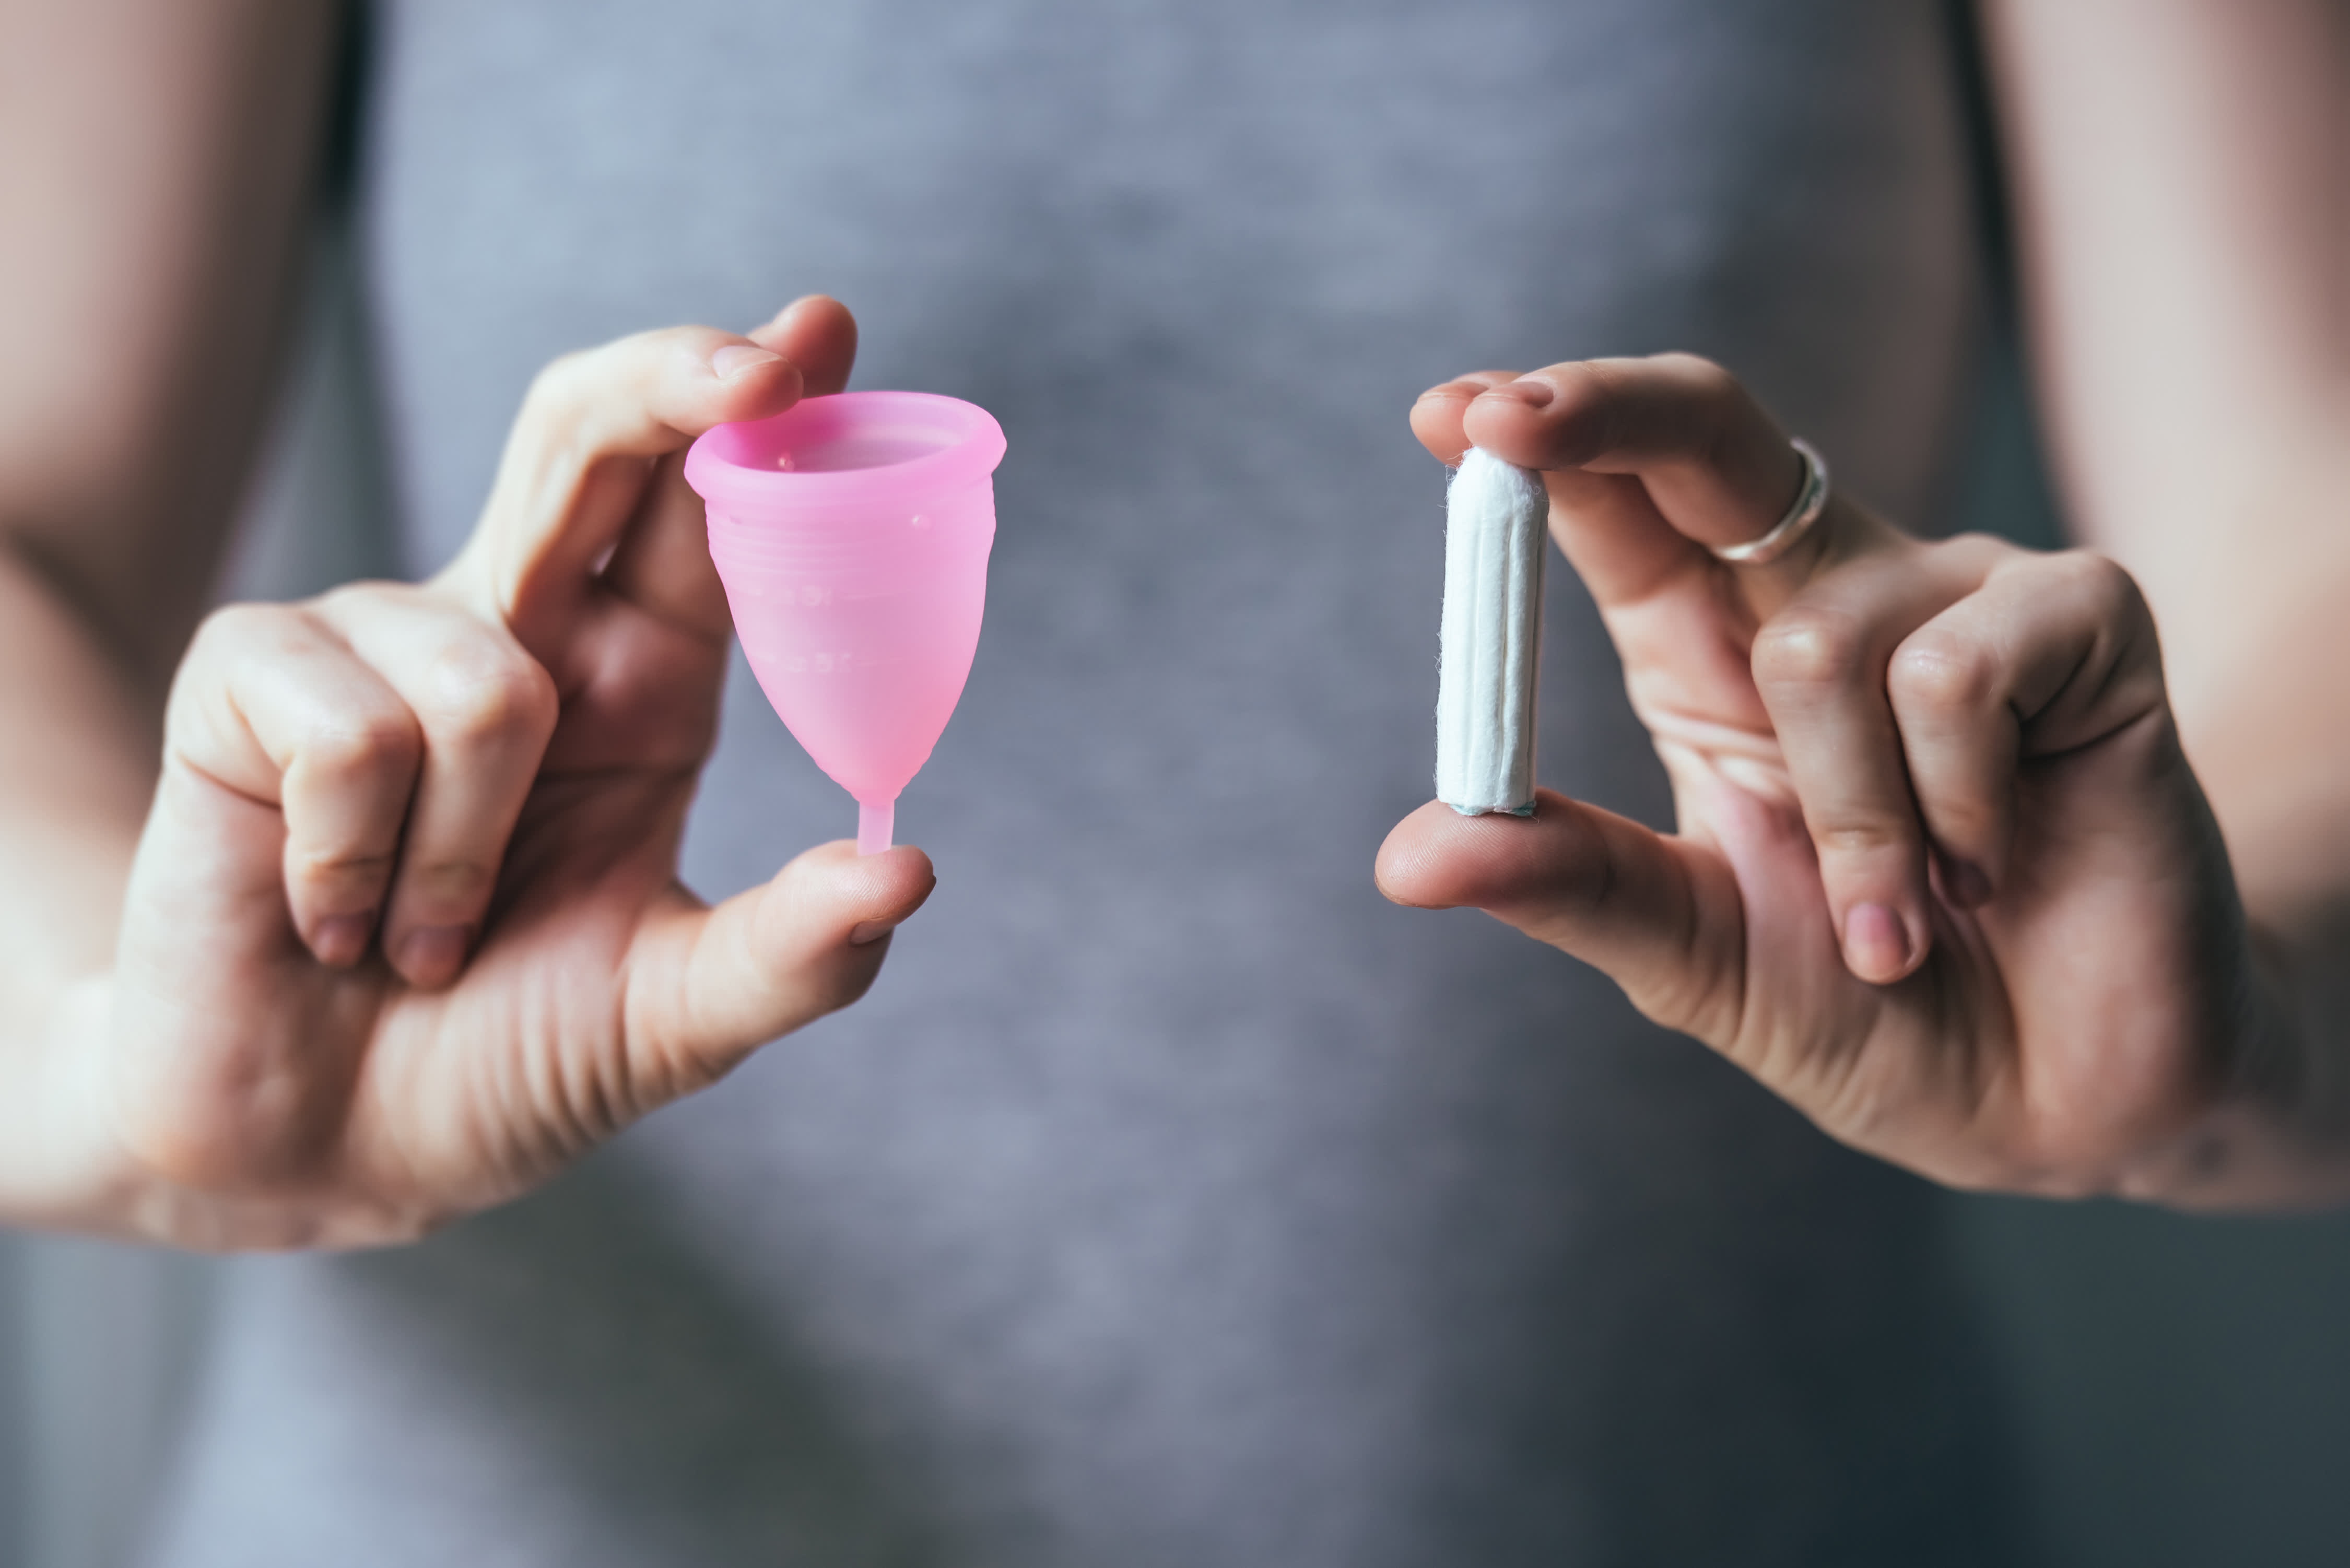 The Cora Menstrual Cup Eliminated My Monthly Period Stress. It